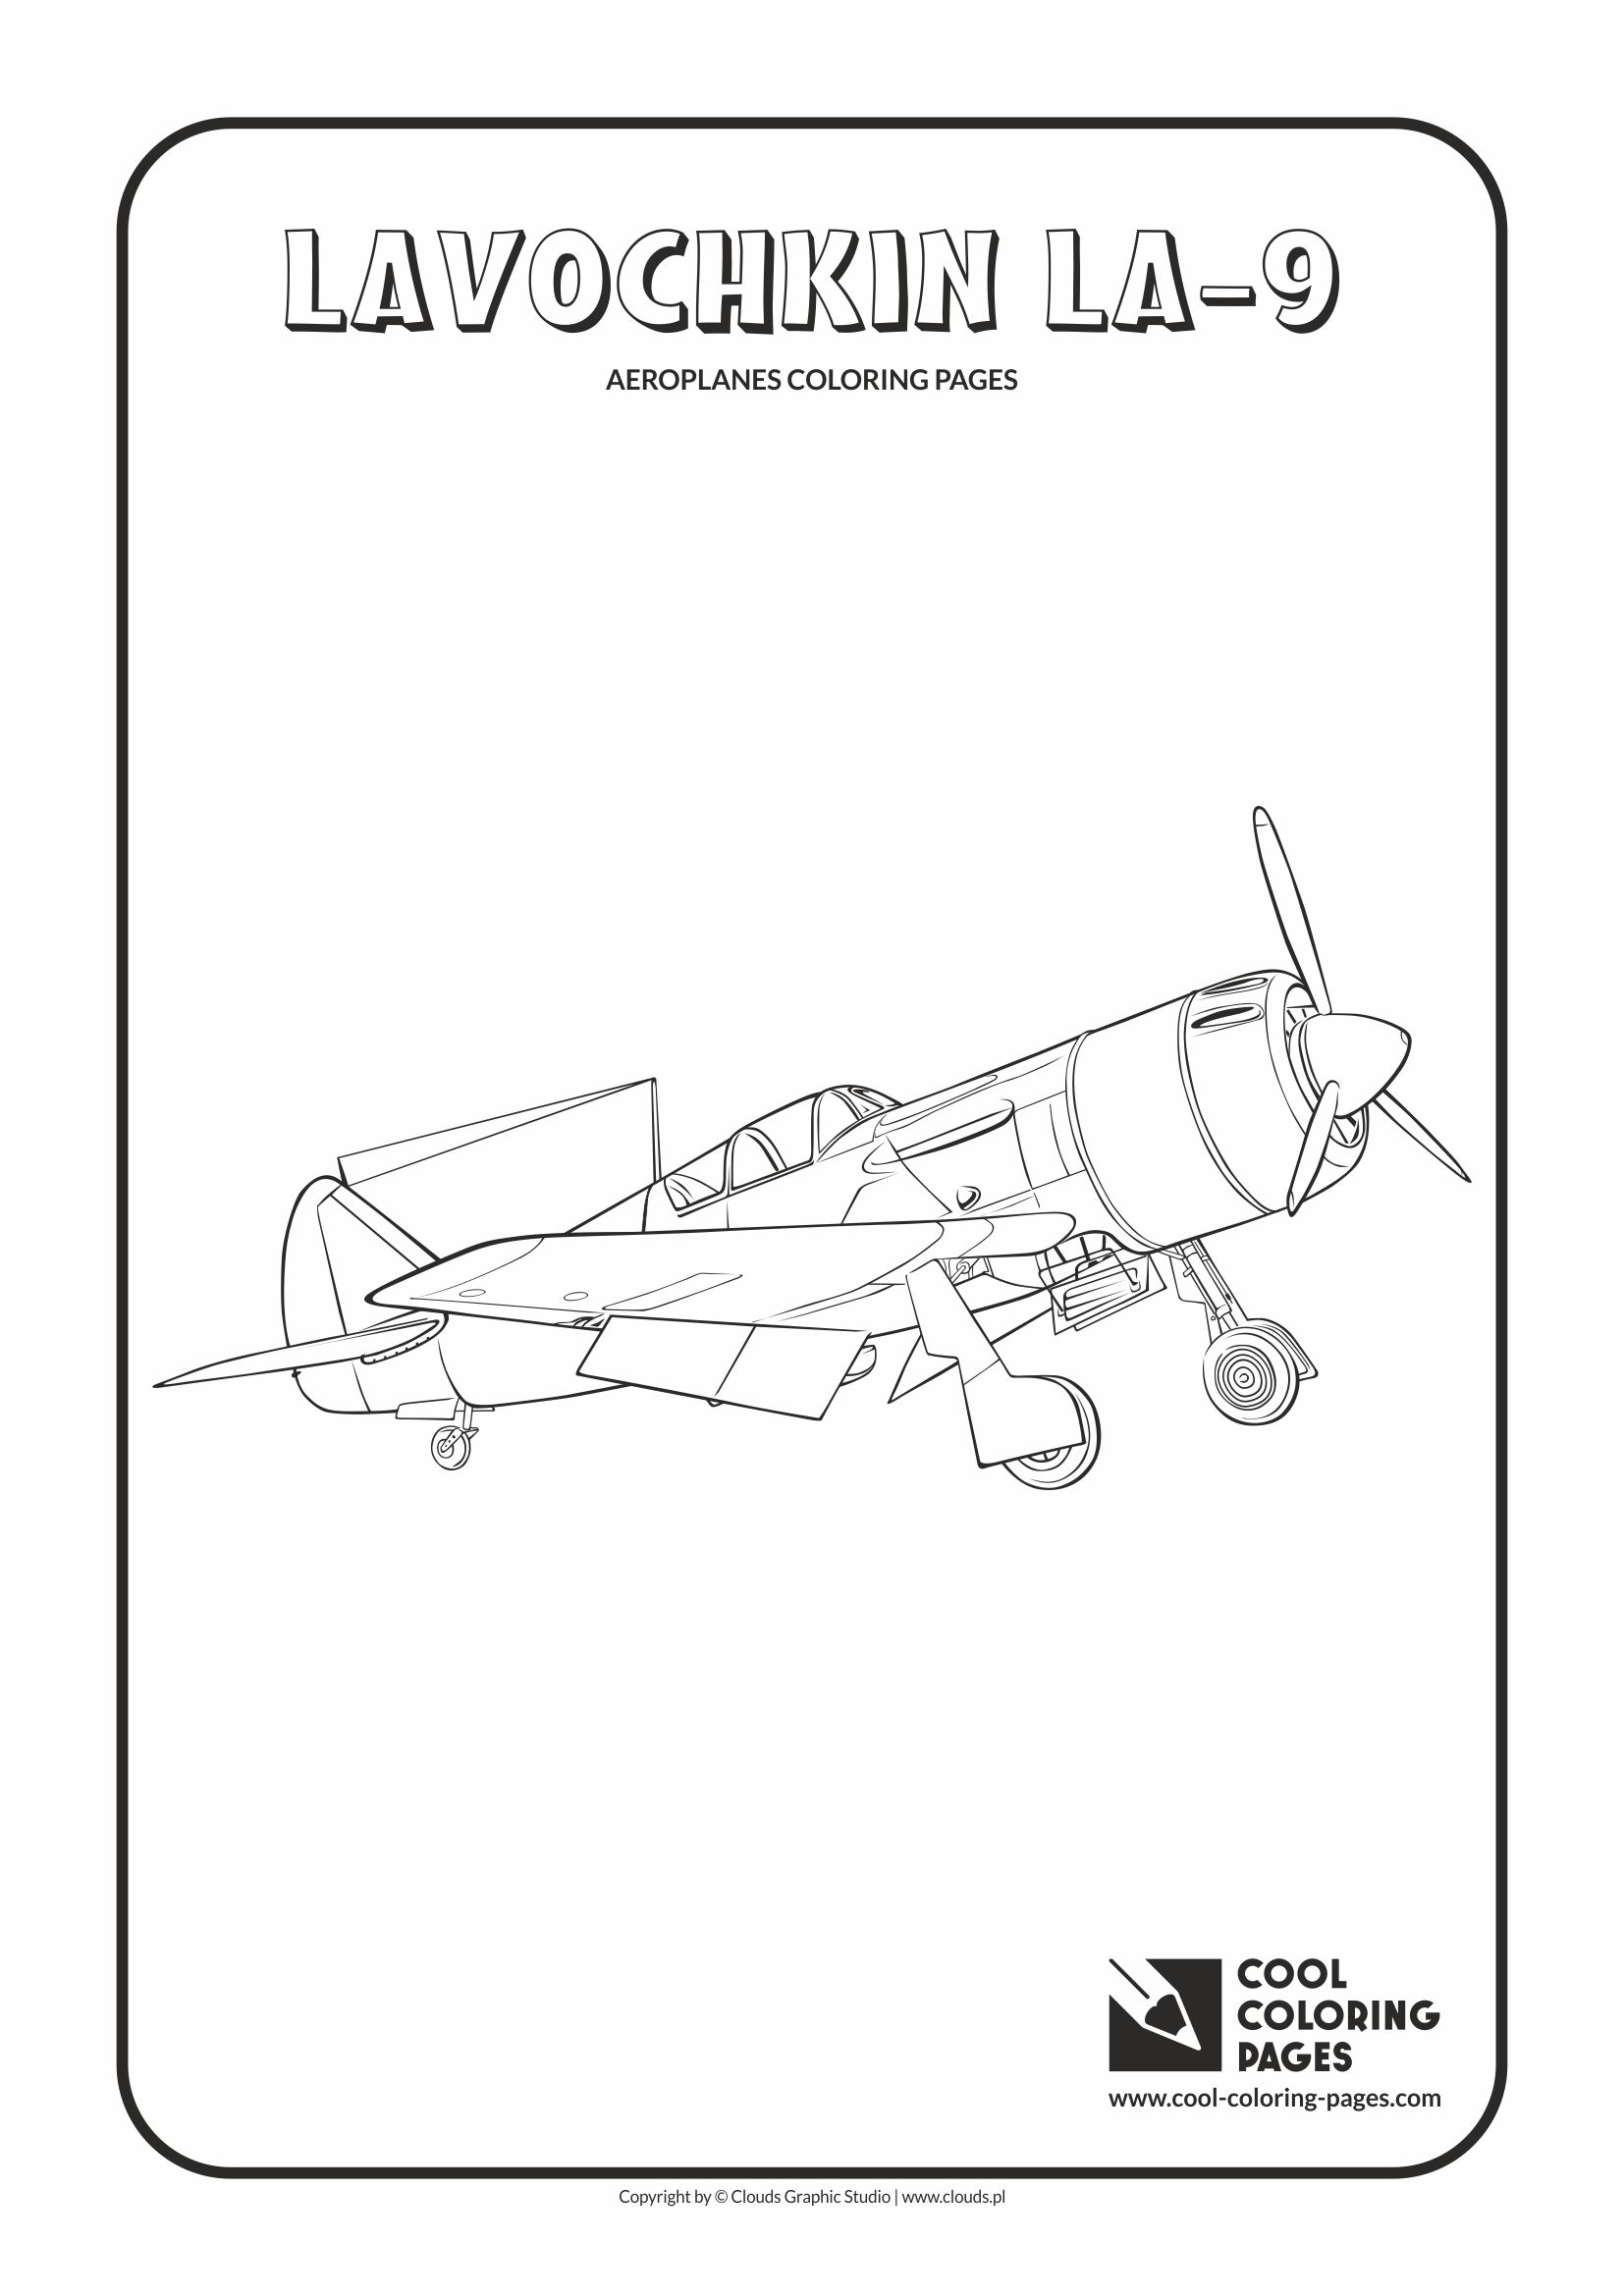 Cool Coloring Pages - Vehicles / Lavochkin La-9 / Coloring page with Lavochkin La-9